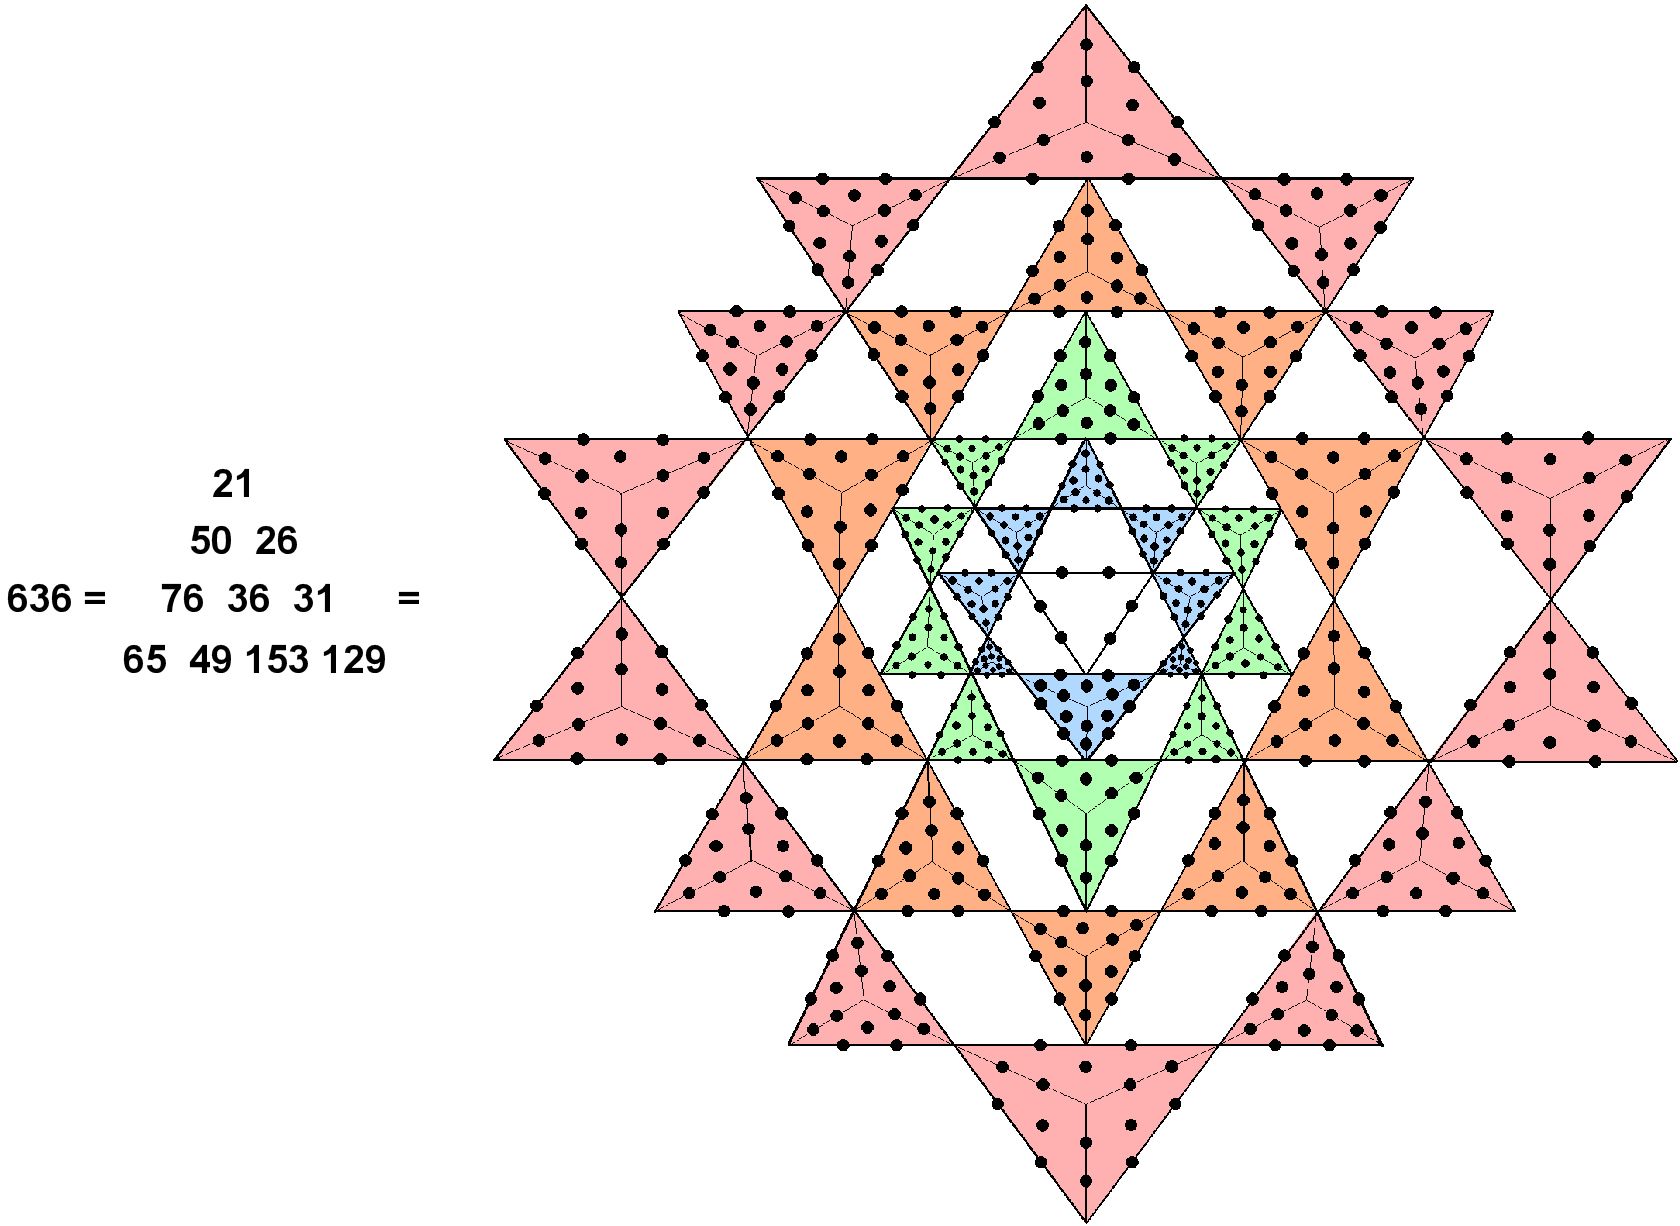 636 hexagonal yods in 2-d Sri Yantra with Type A triangles